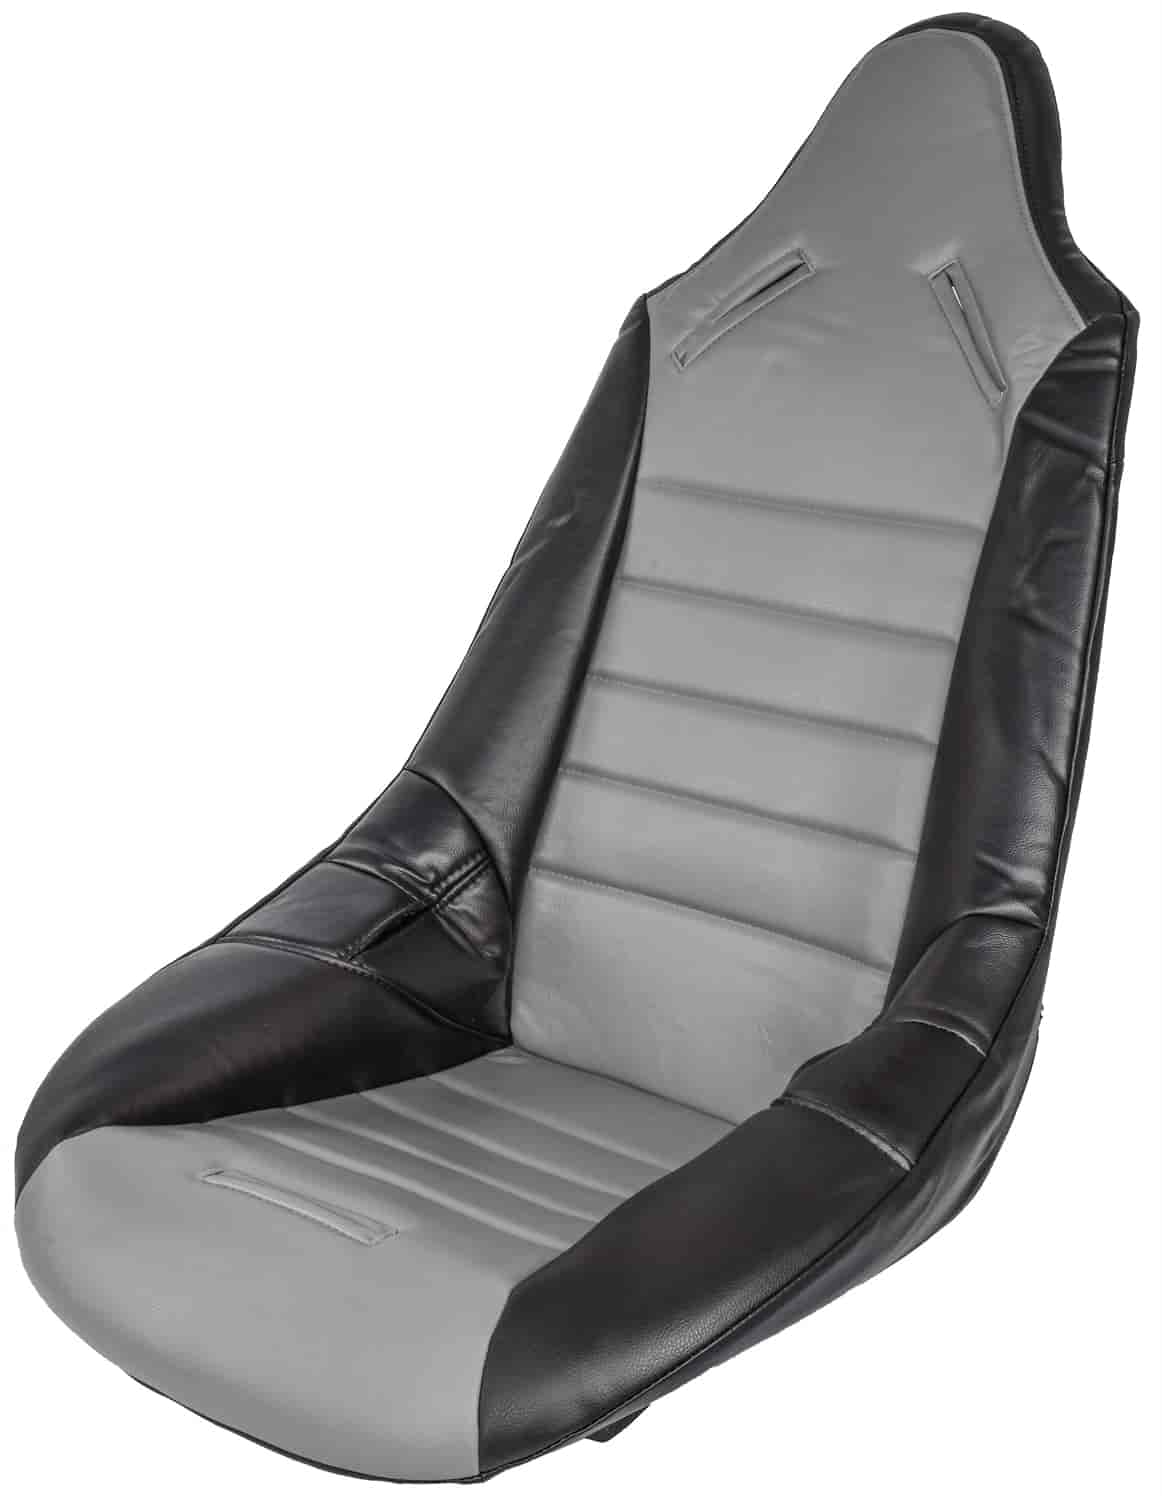 Pro High Back II Vinyl Seat Cover Grey with Black Trim